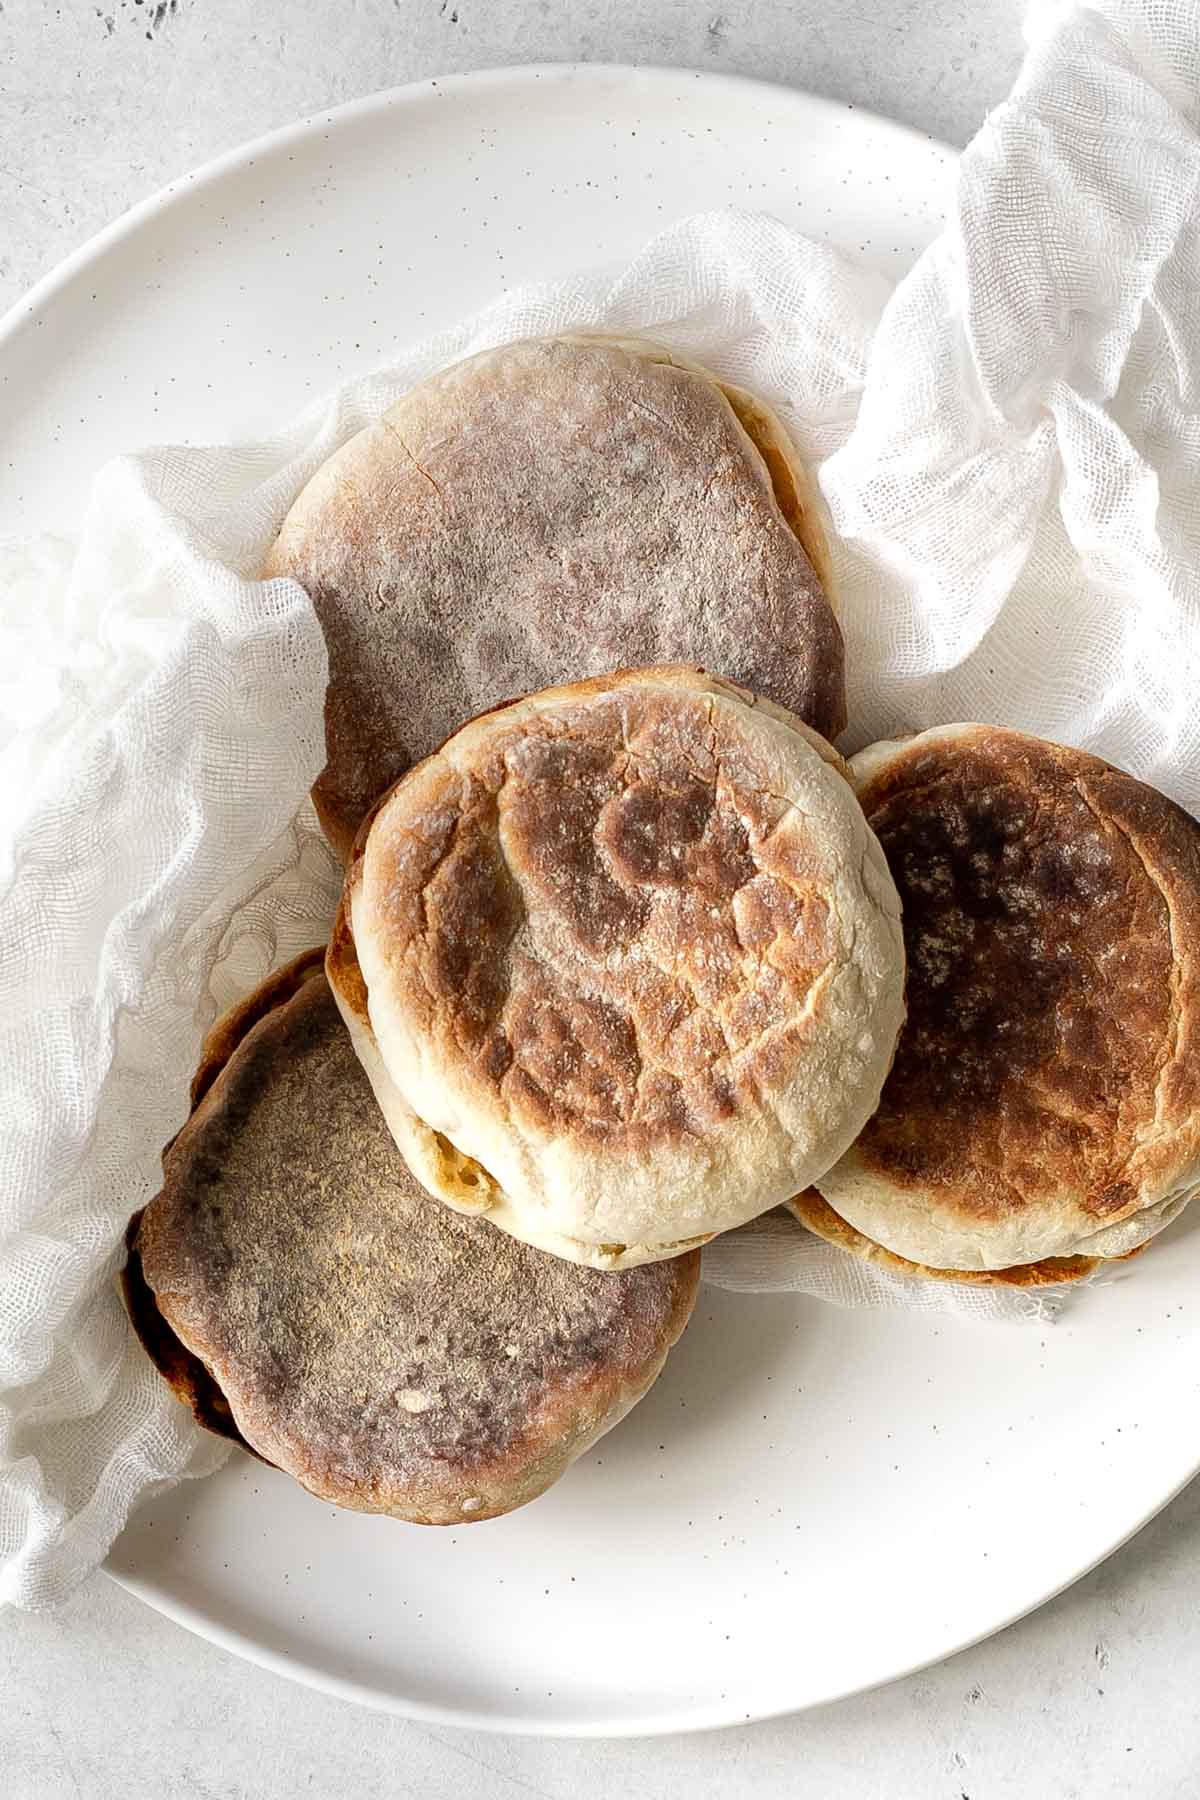 four toasted english muffins sitting on a plate.